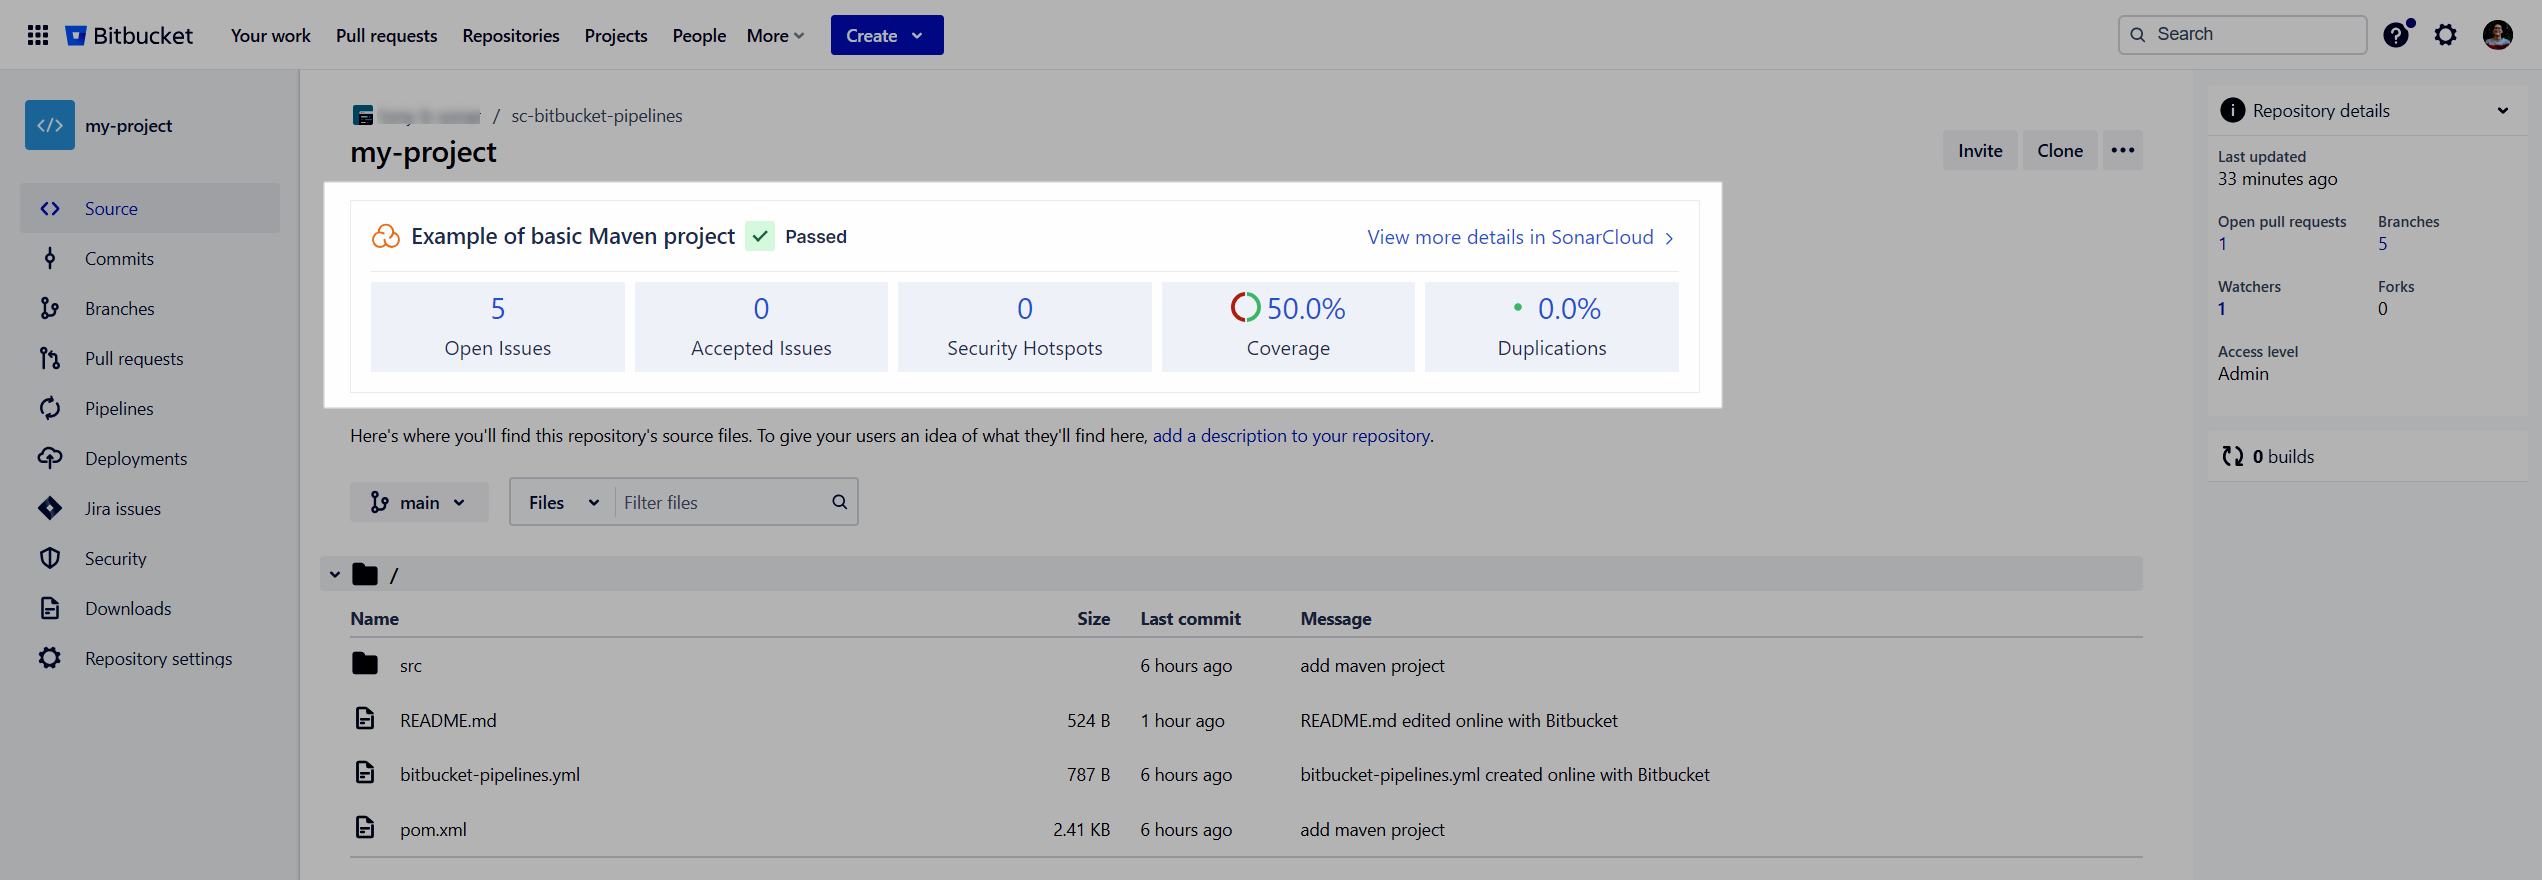 Screenshot of the BitBucket interface with the SonarCloud project analysis results widget.